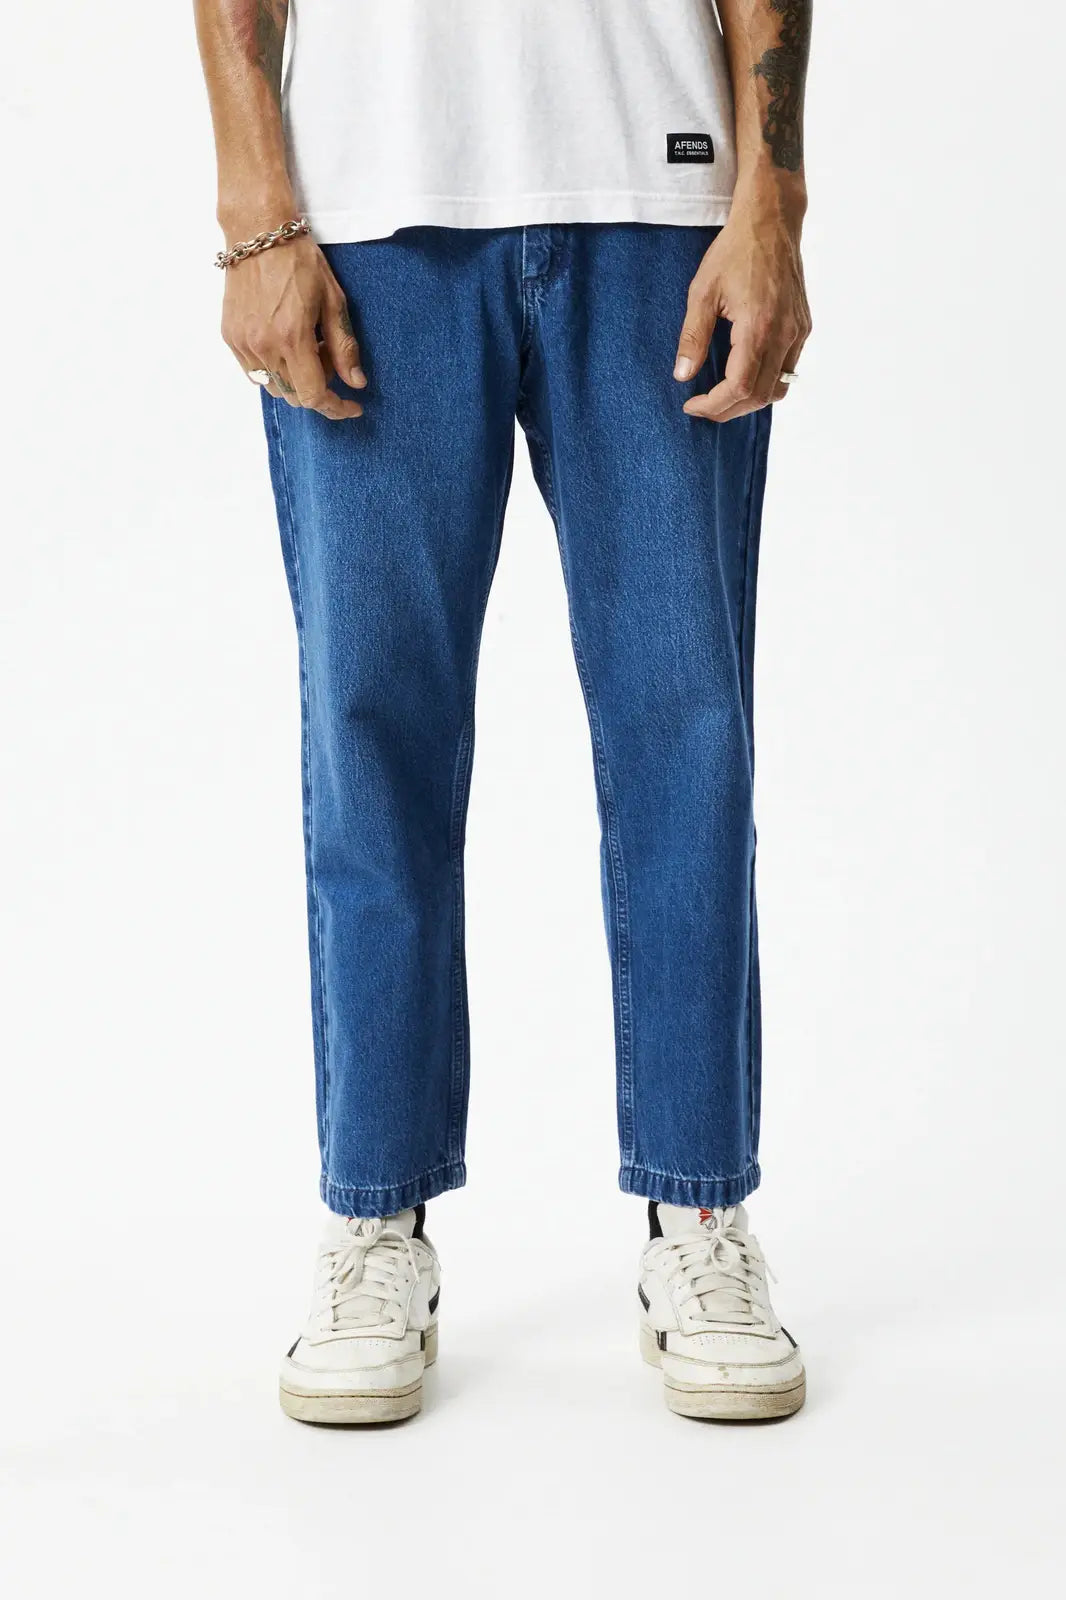 Afends ninety twos - hemp denim relaxed fit jean - authentic blue